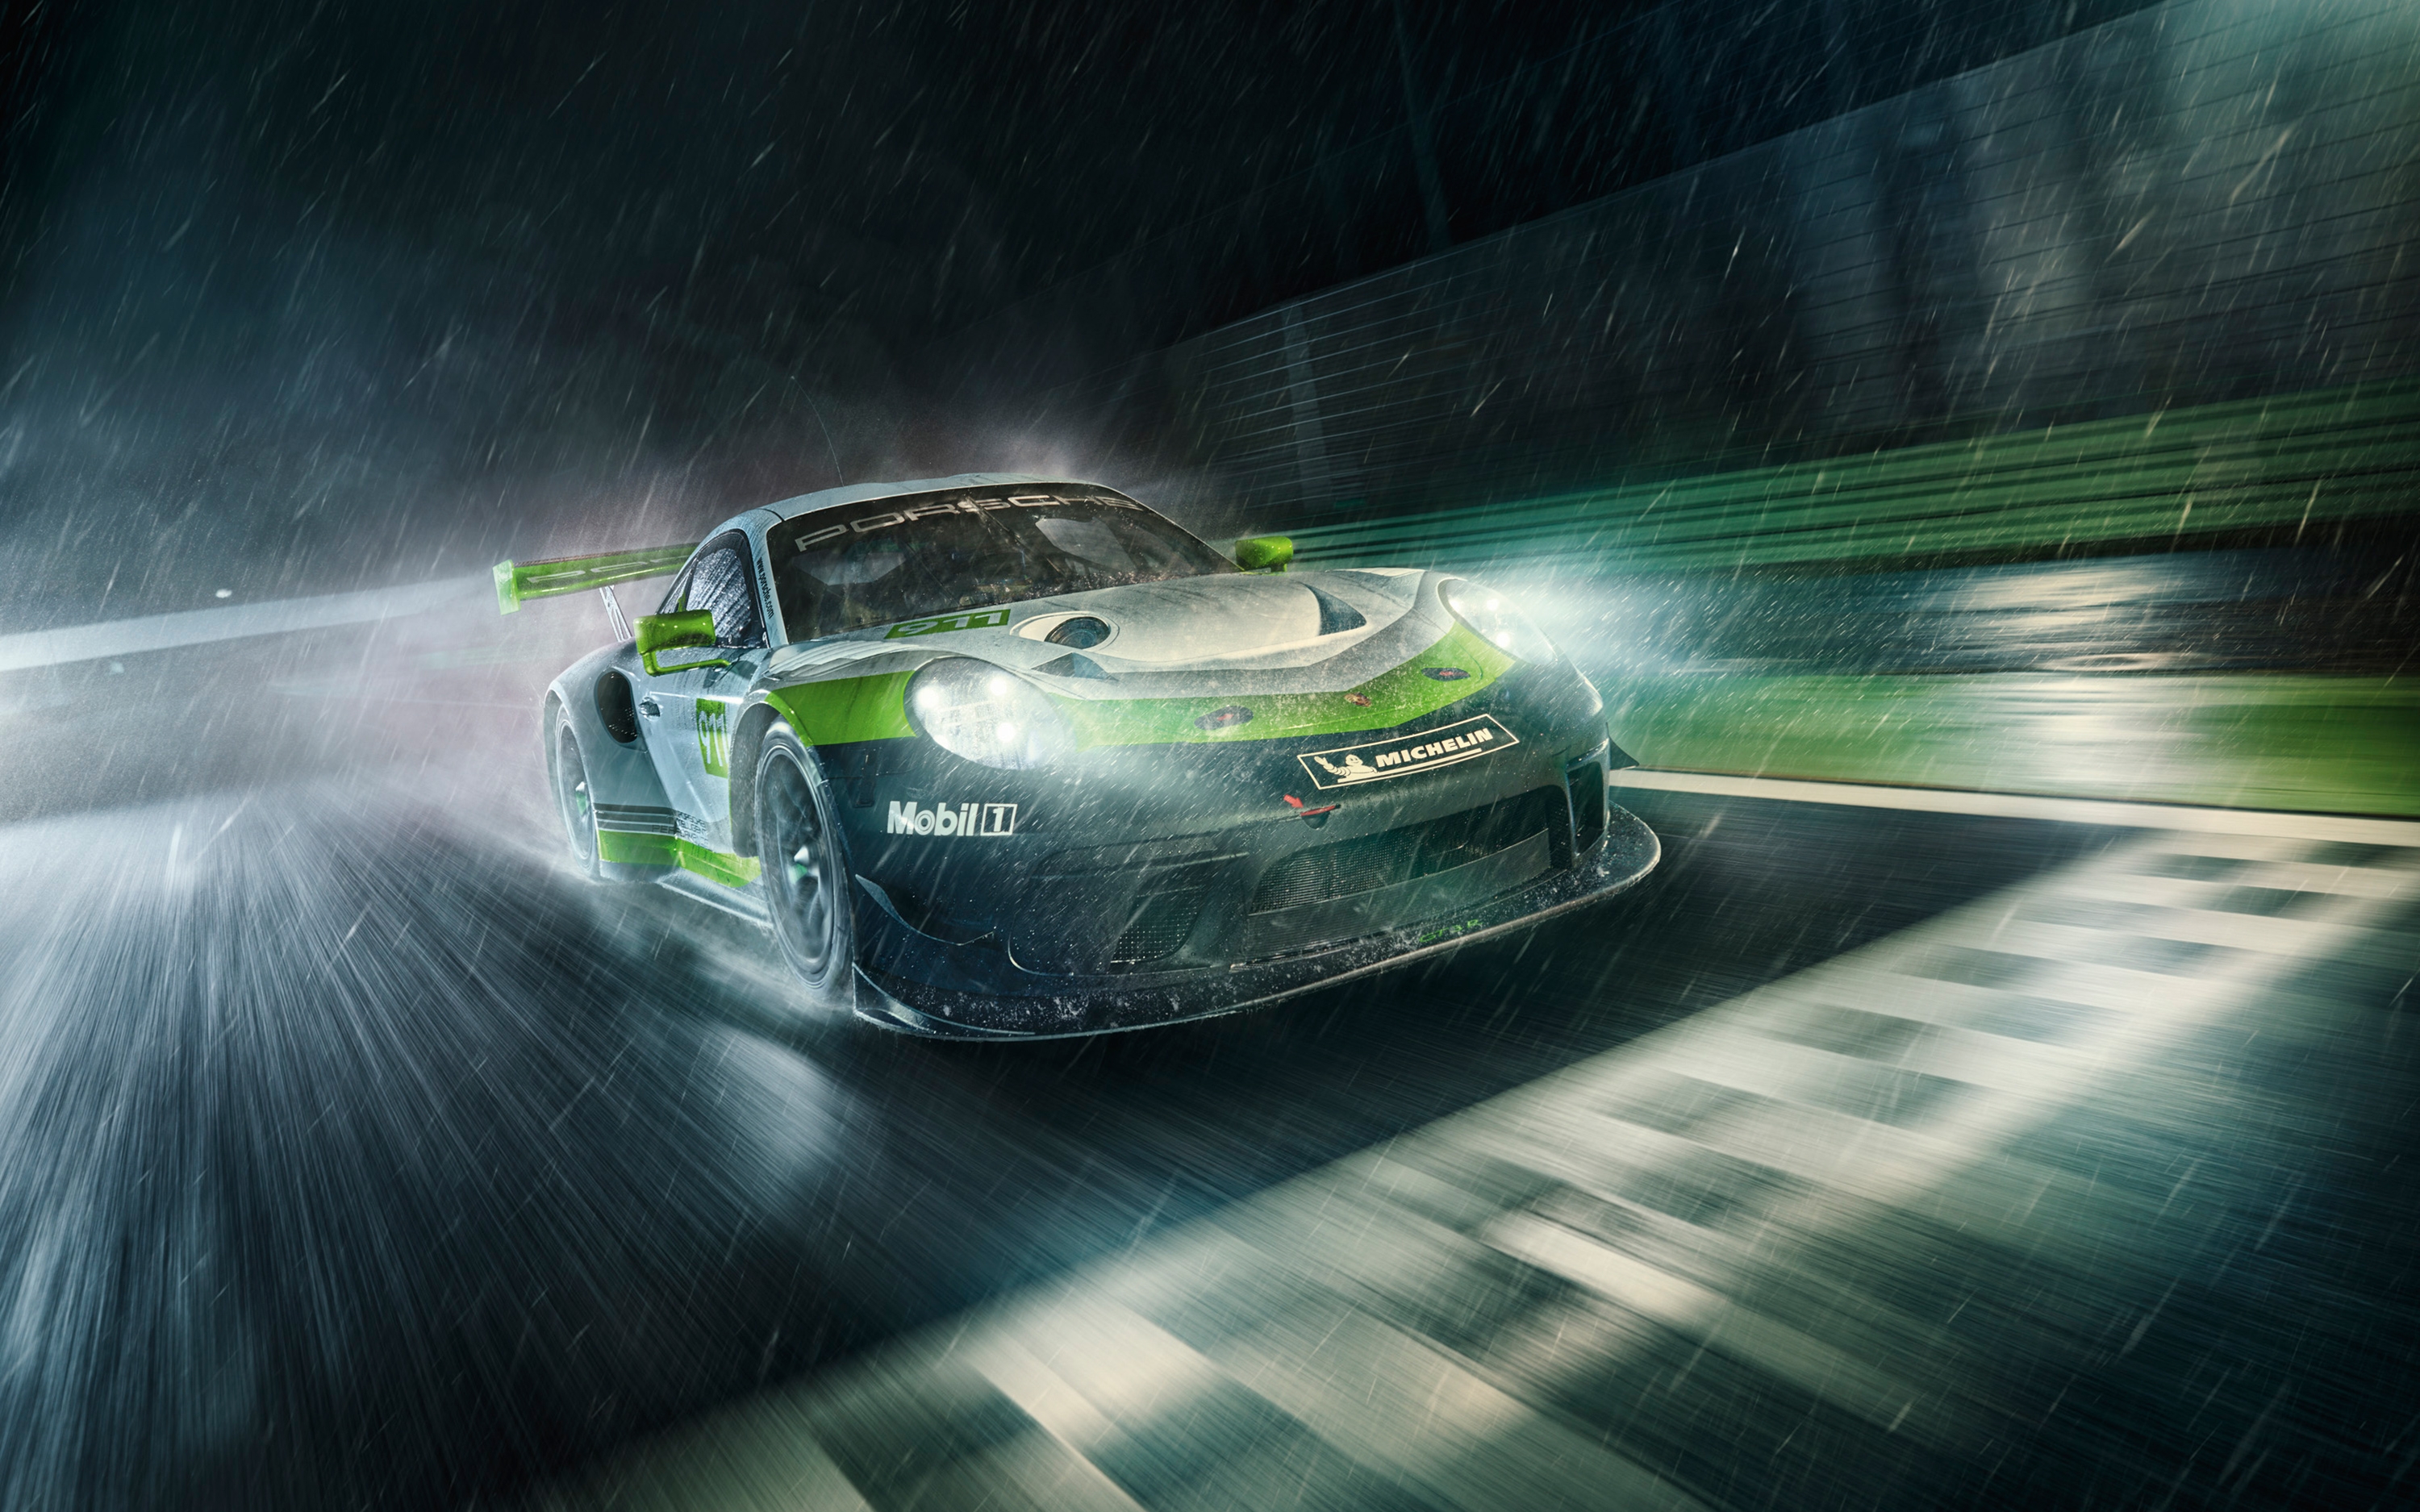 Free photo The Porsche 911 Gt3 R drives on a rainy road at night.